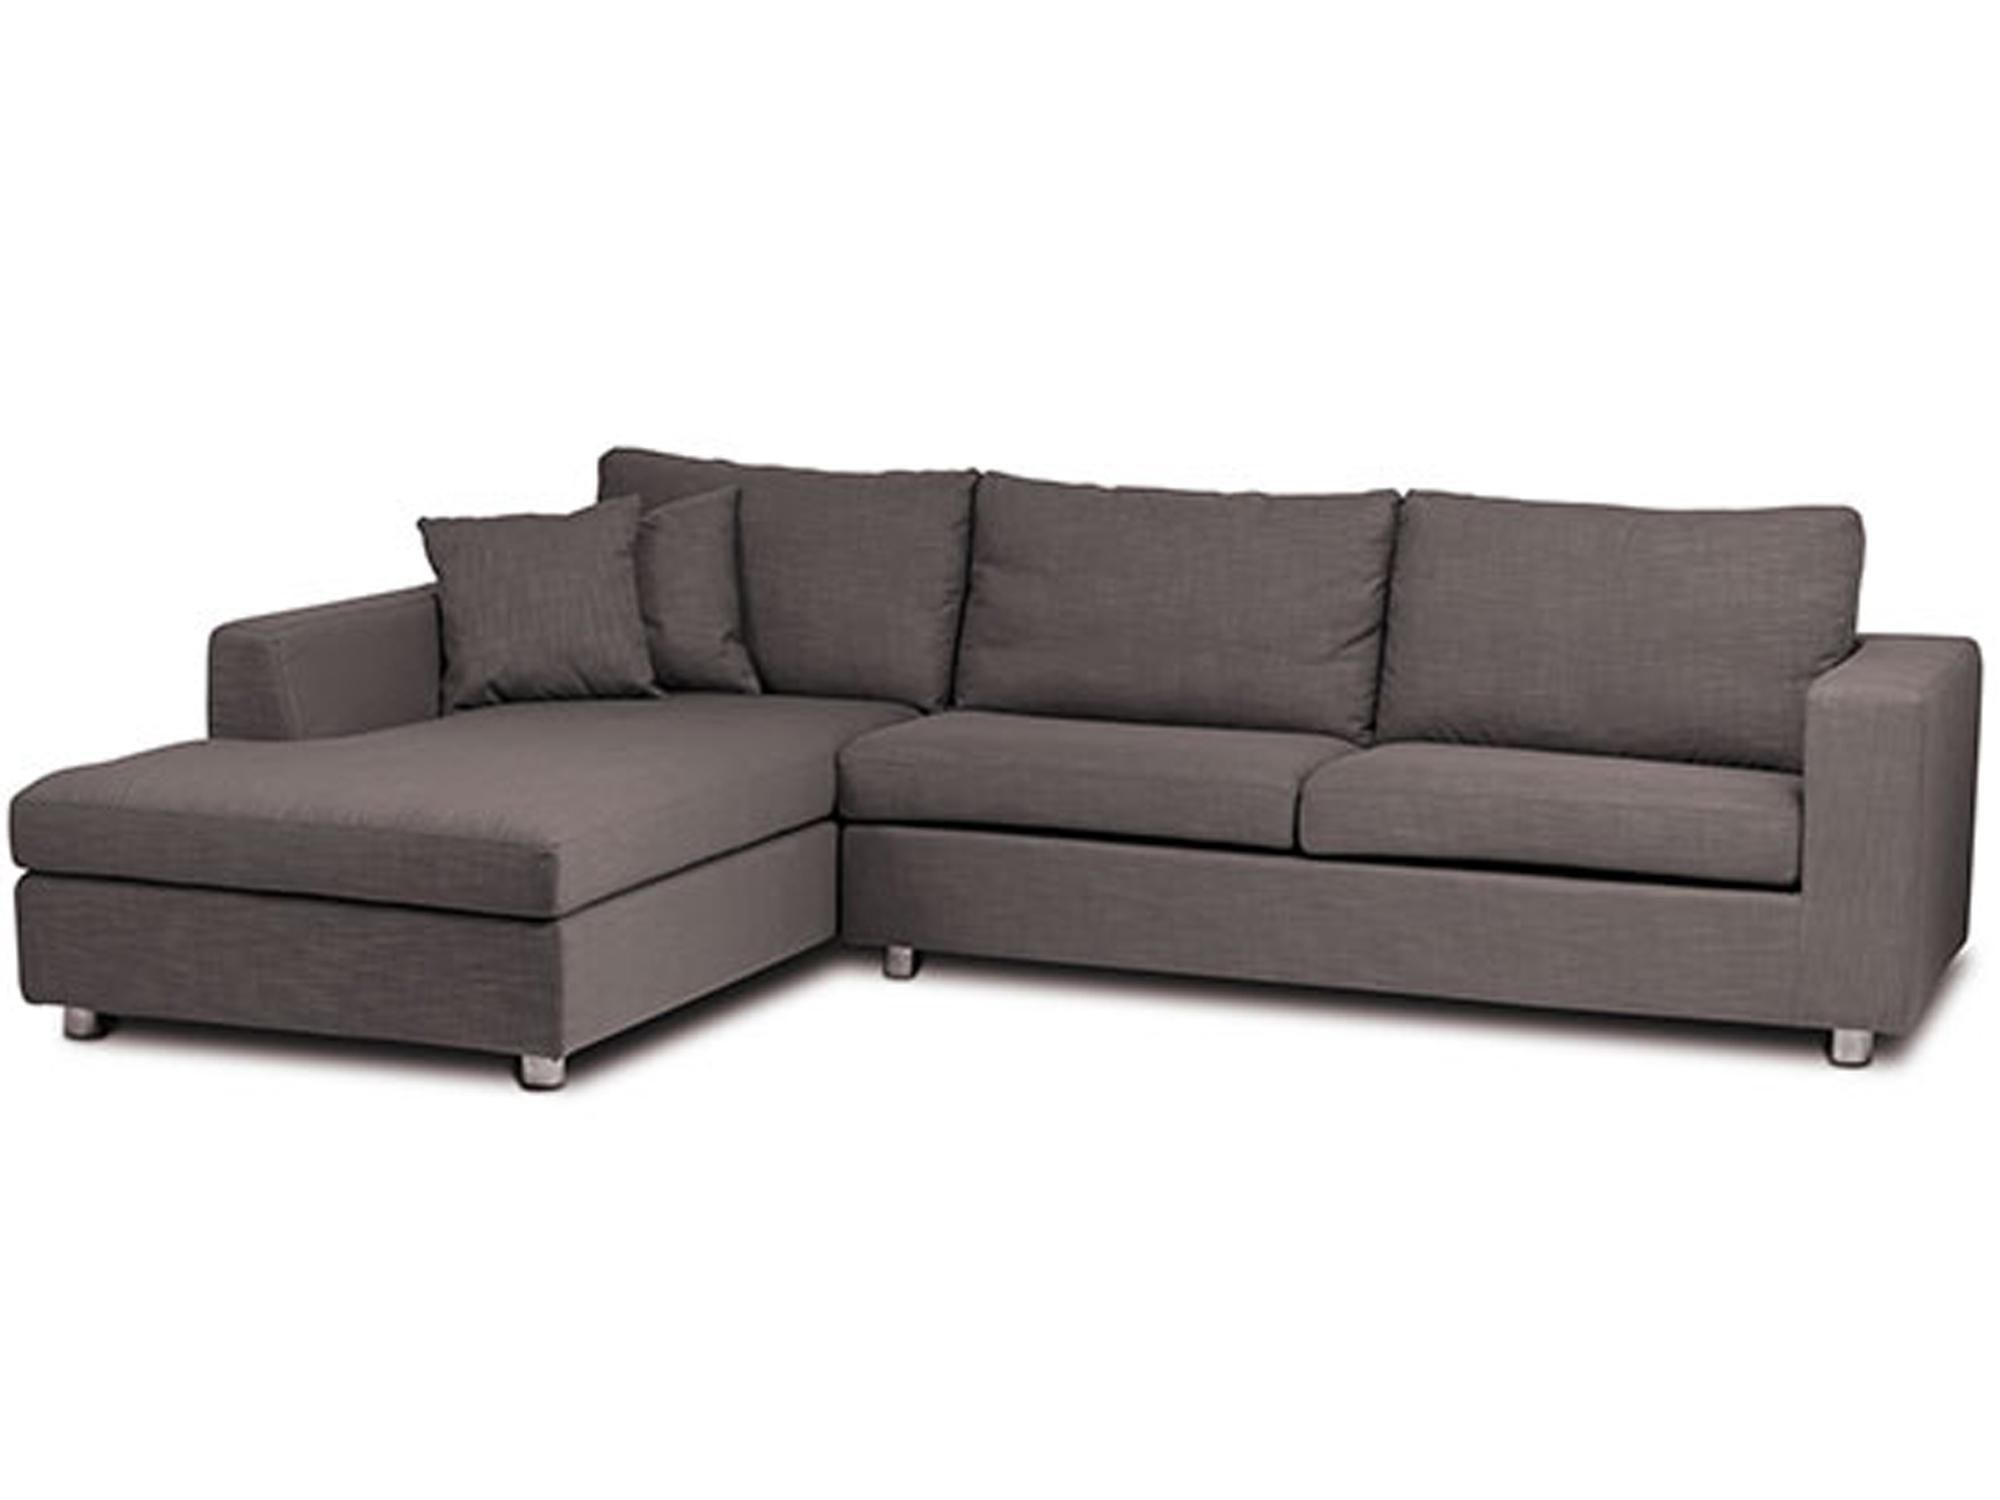 Sofas Center : Formidable Corner Sofa Picture Ideas Beds Uk Cheap In Cheap Corner Sofa Bed (View 10 of 20)